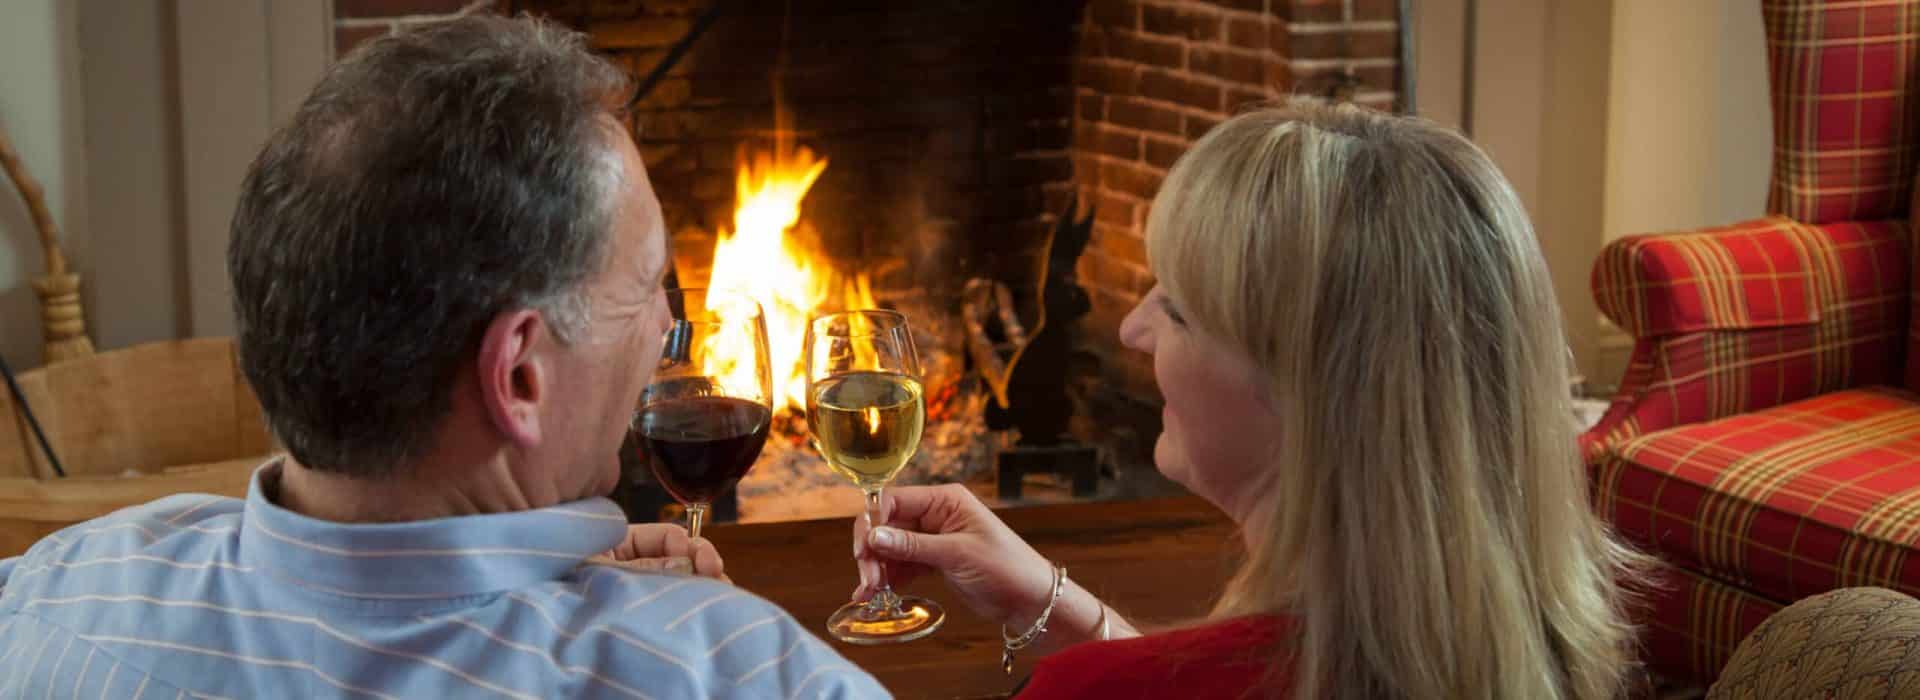 Couple toasting each other with wine in front of a fireplace|cyber monday getaway deals